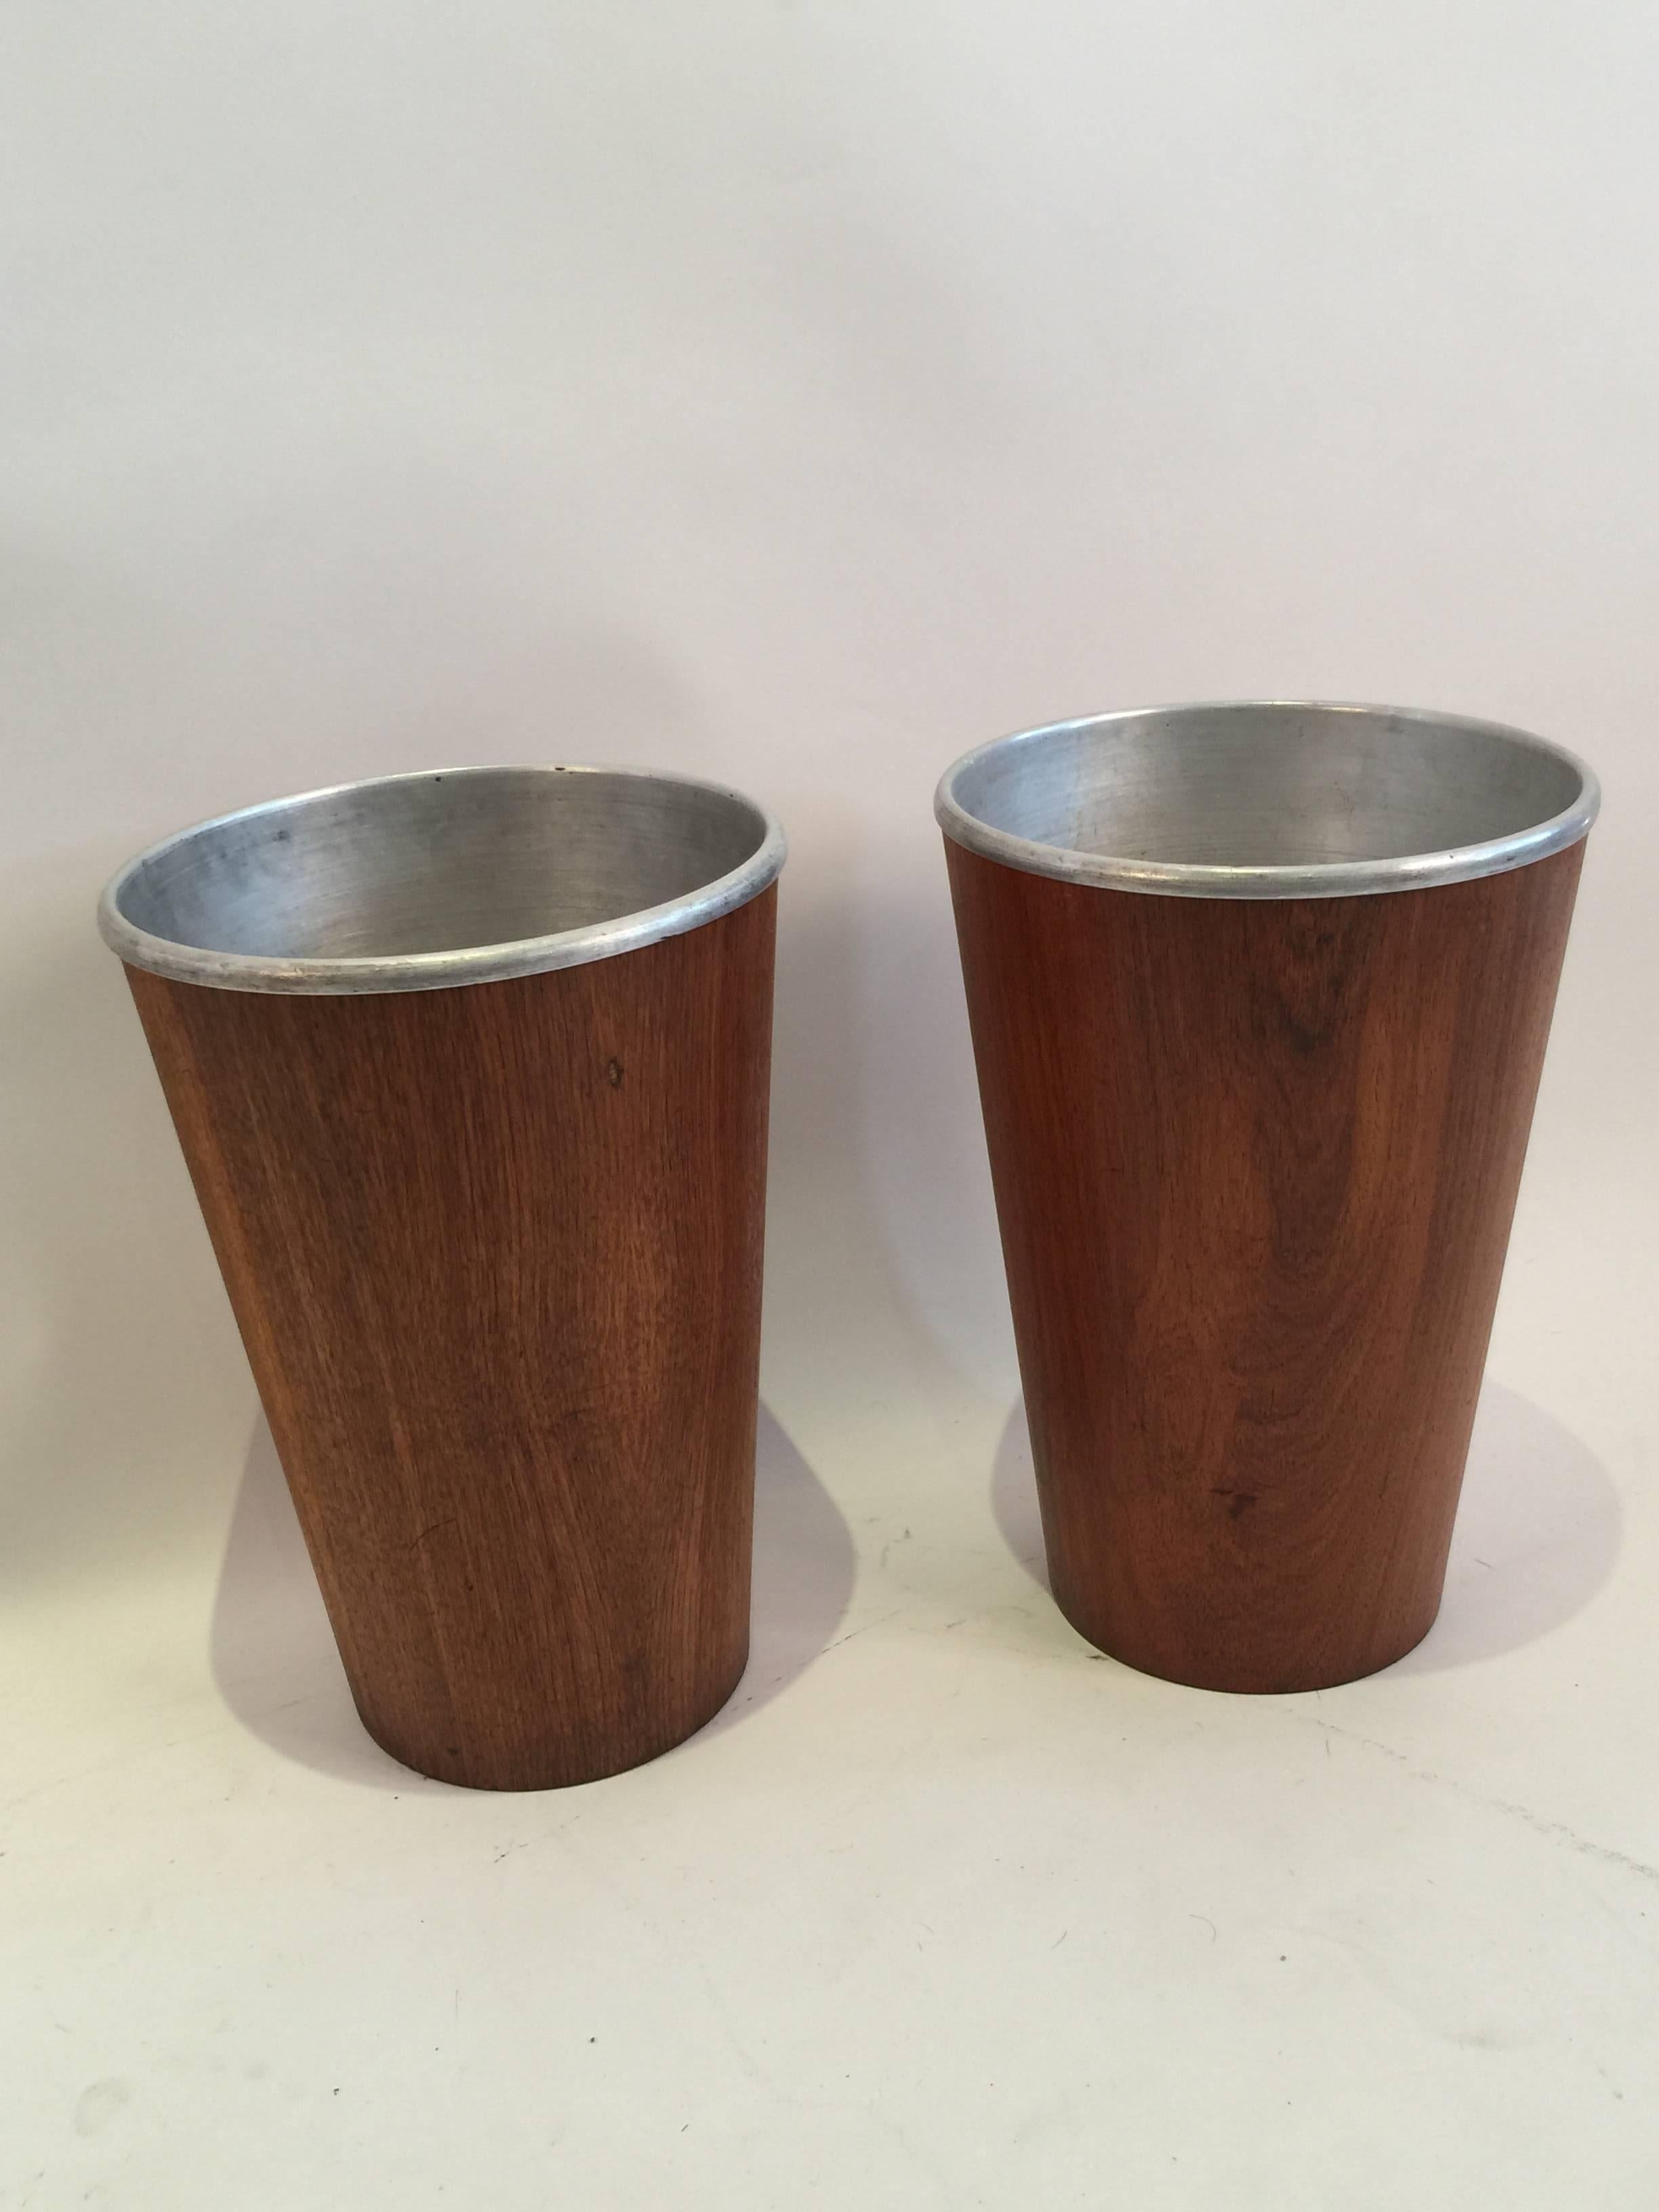 Mid-20th Century Pair of Wastebaskets with Metal Inserts by Martin Aberg for Servex